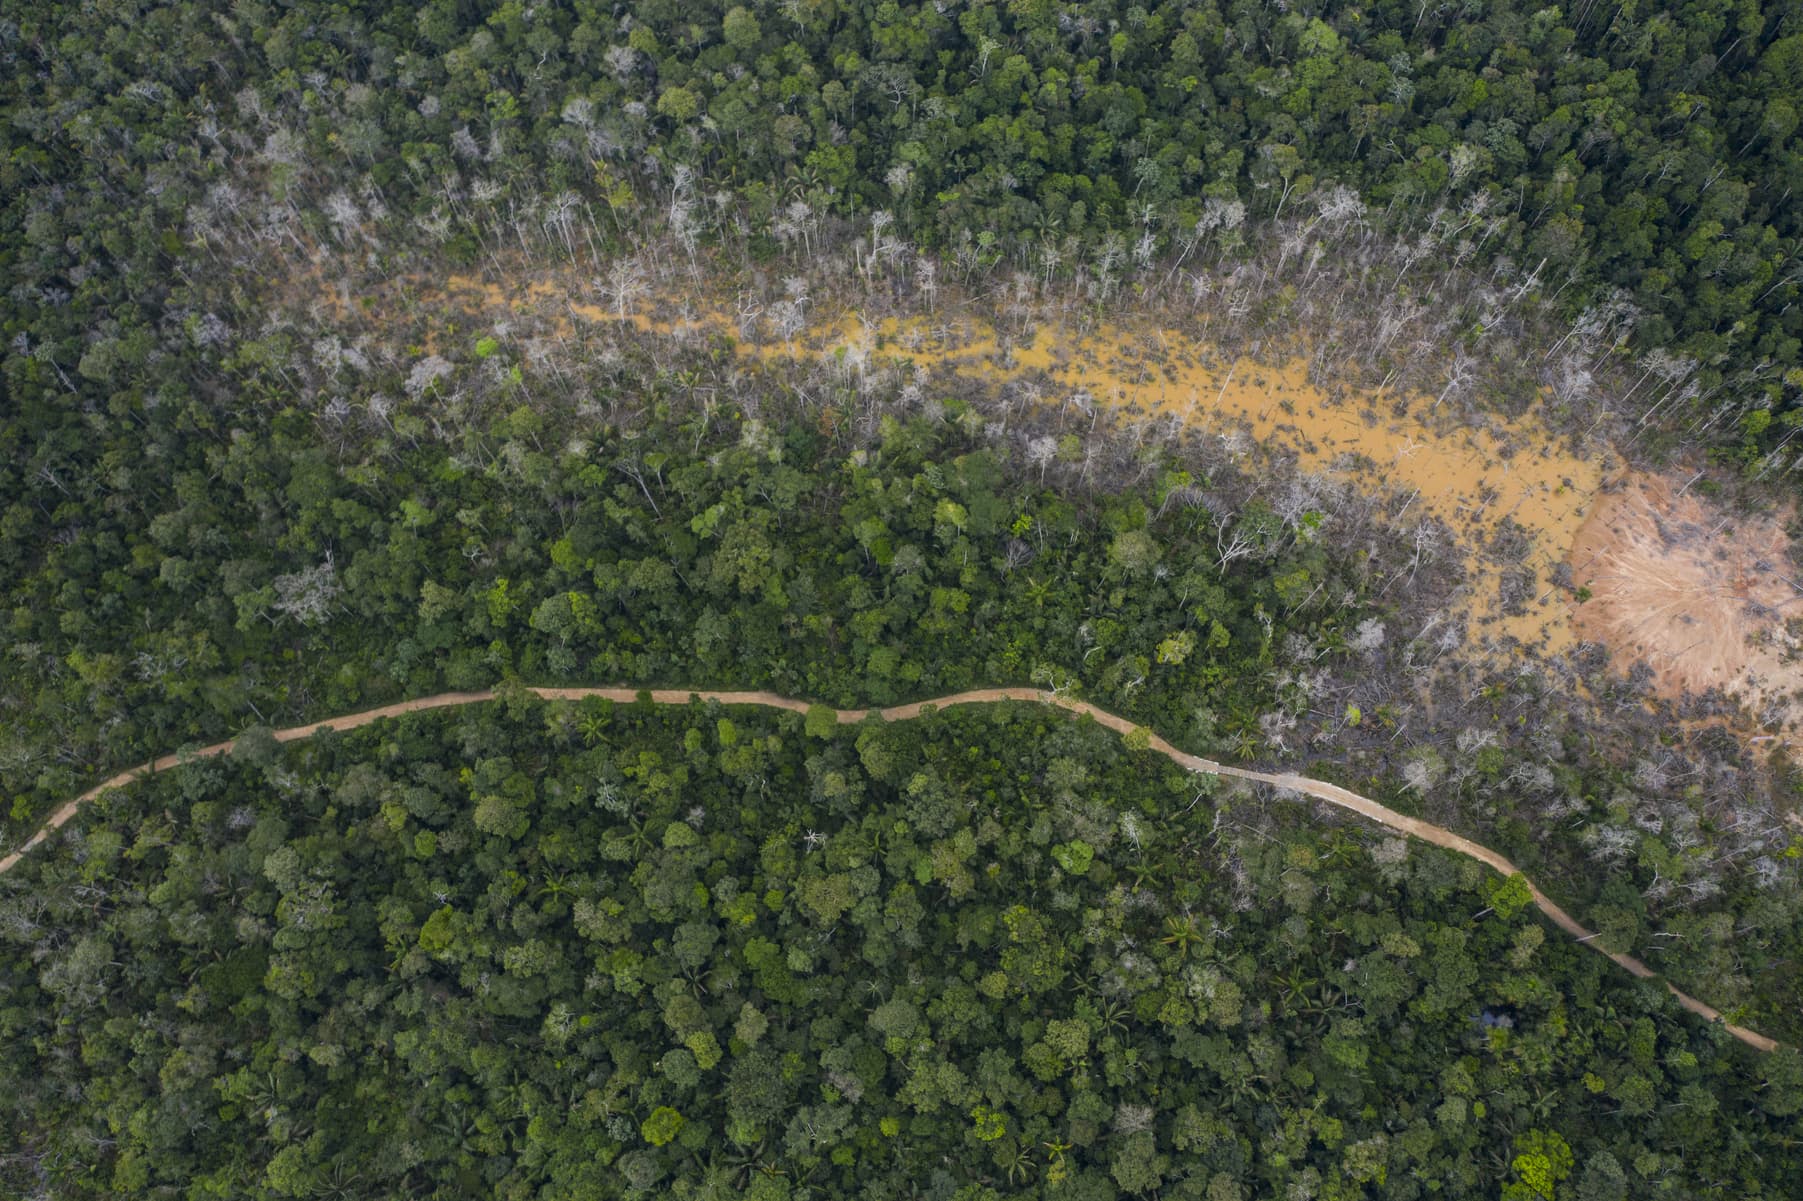 This April 3, 2019, photo shows the destruction of the jungle caused by illegal miners in Peru's Tambopata province. (Rodrigo Abd/AP)